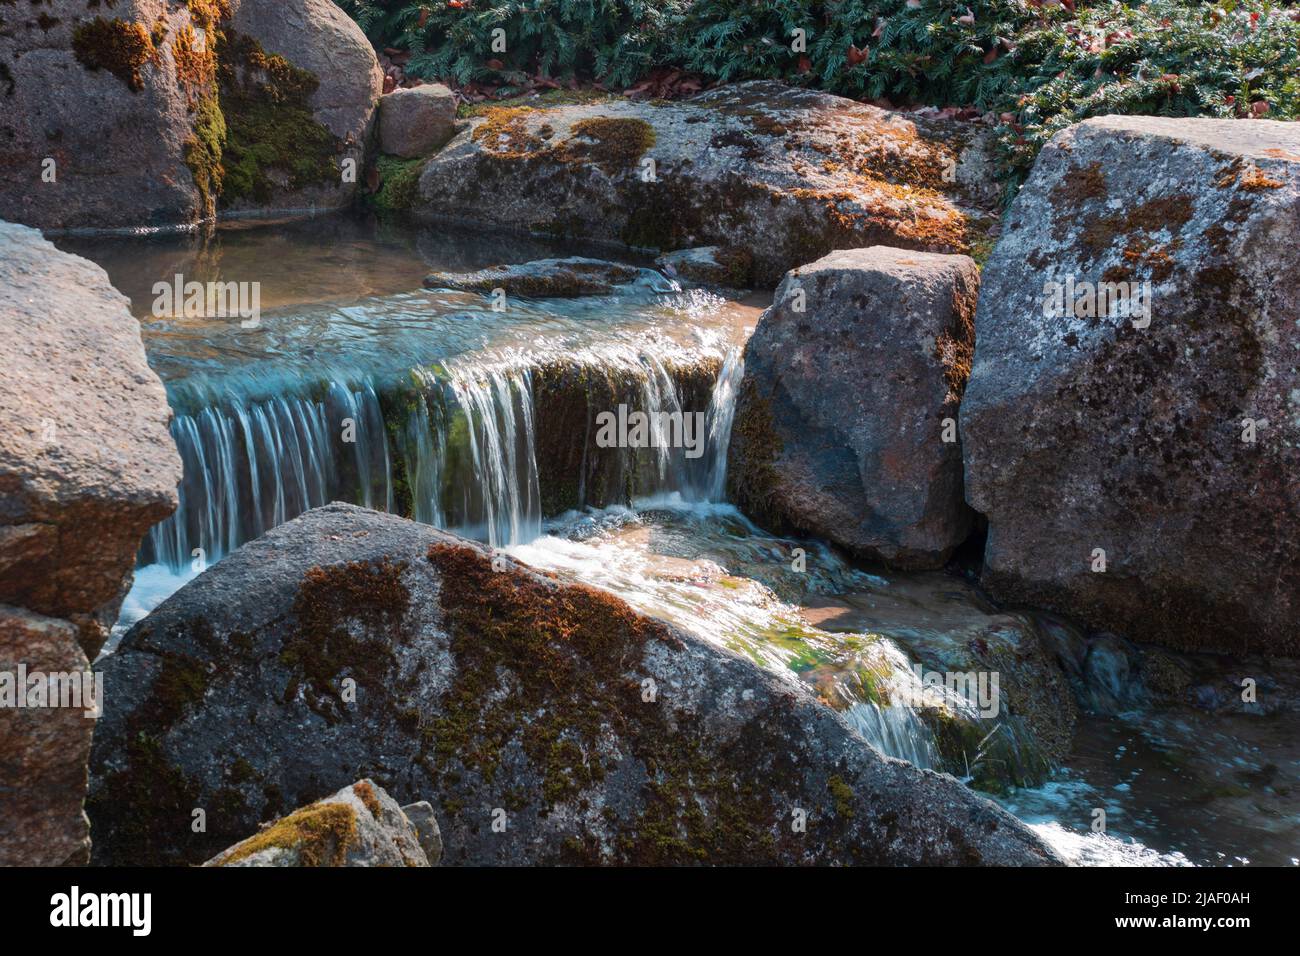 relaxing scene with a small stream and sparkling small waterfalls Stock Photo